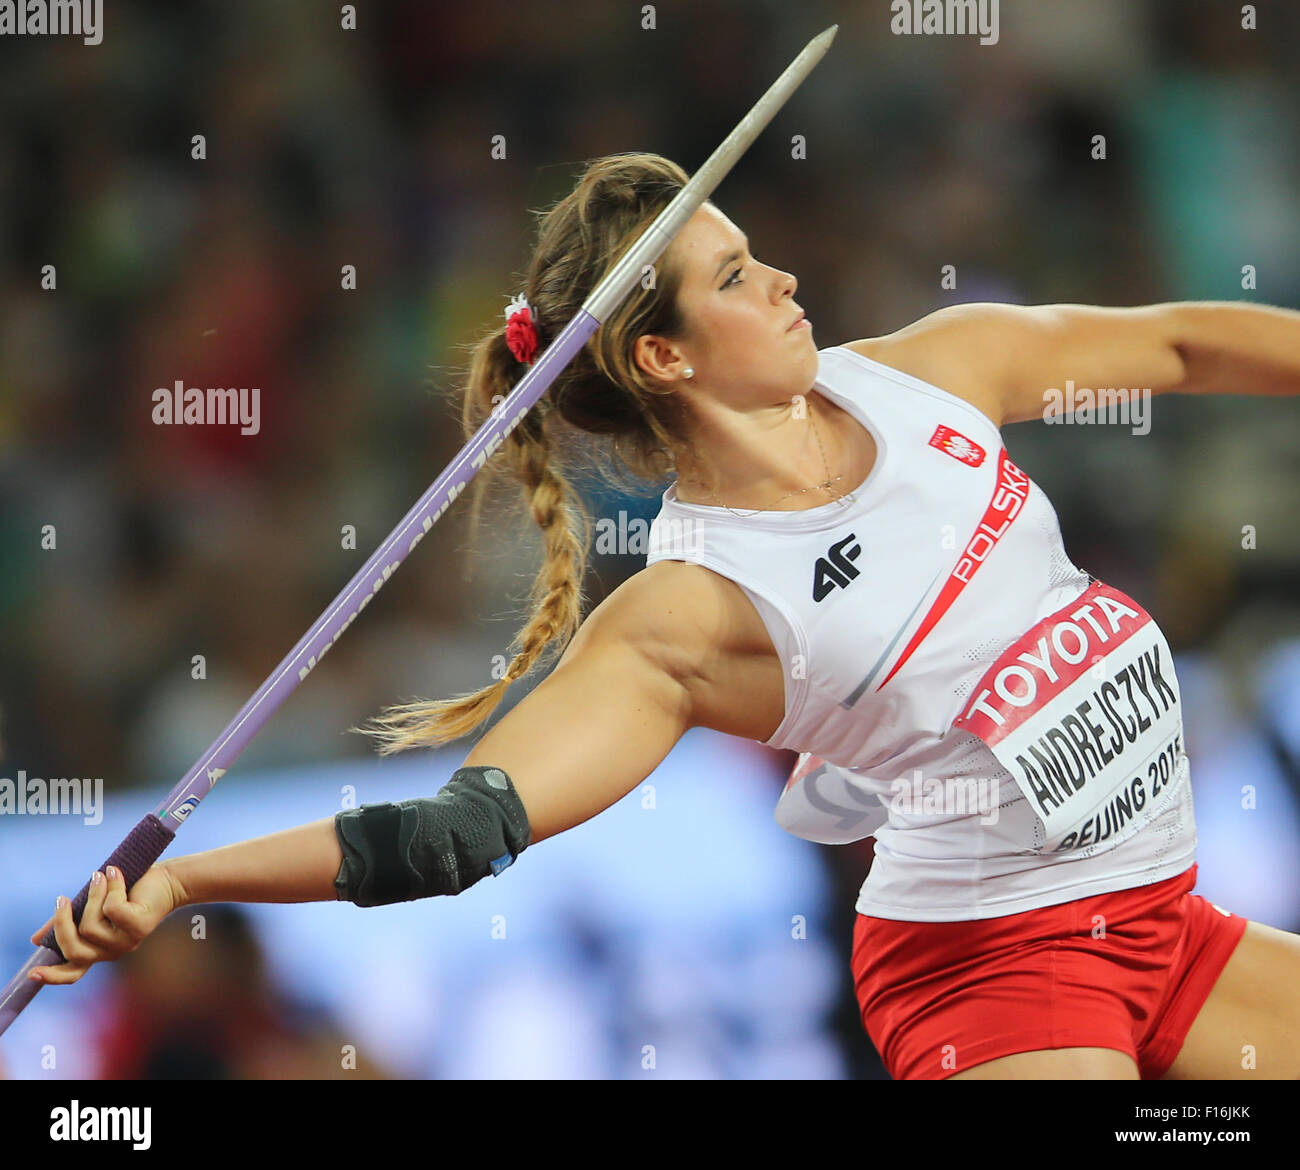 Beijing, China. 28th Aug, 2015. Maria Andrejczyk of Poland in action during the Women's Javelin Throw Qualification at the Beijing 2015 IAAF World Championships at the National Stadium, also known as Bird's Nest, in Beijing, China, 28 August 2015. Credit:  dpa picture alliance/Alamy Live News Stock Photo